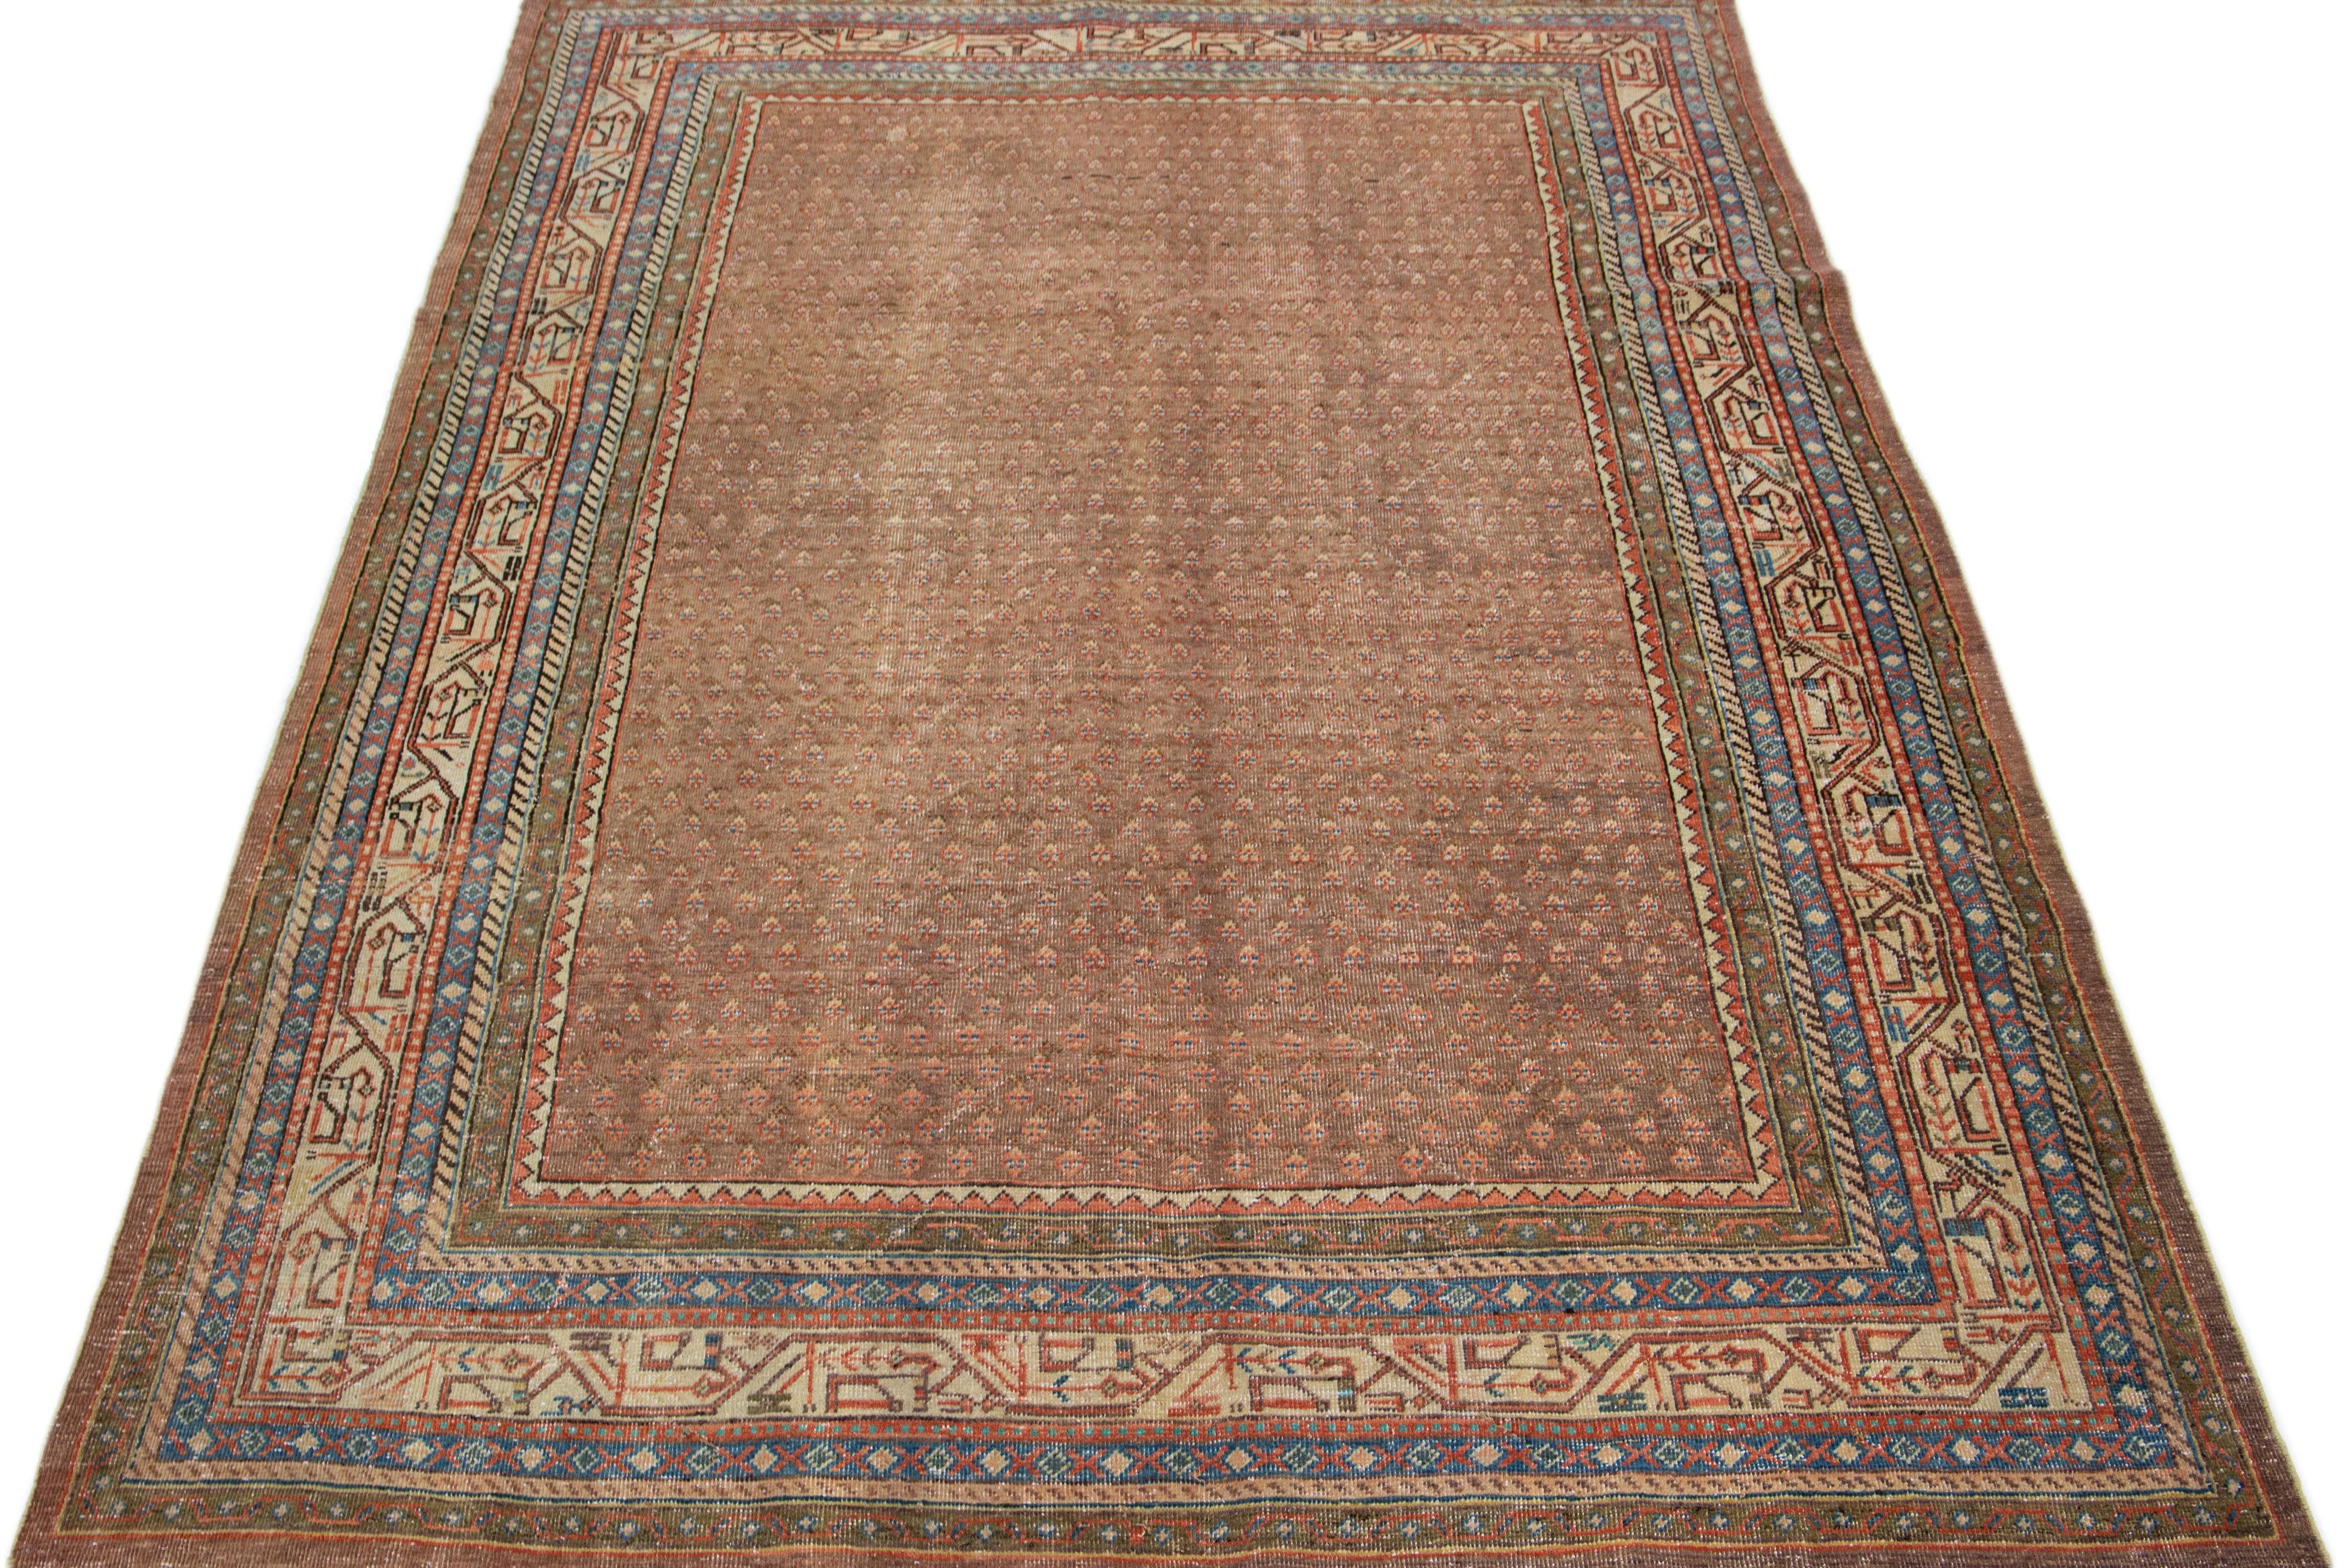 This exquisite antique Hamadan rug is hand knotted from premium wool, boasting a beige-tan field complemented by a captivating, all-over pattern design enriched with brown, peach, and blue accents.

This rug measures: 6'9